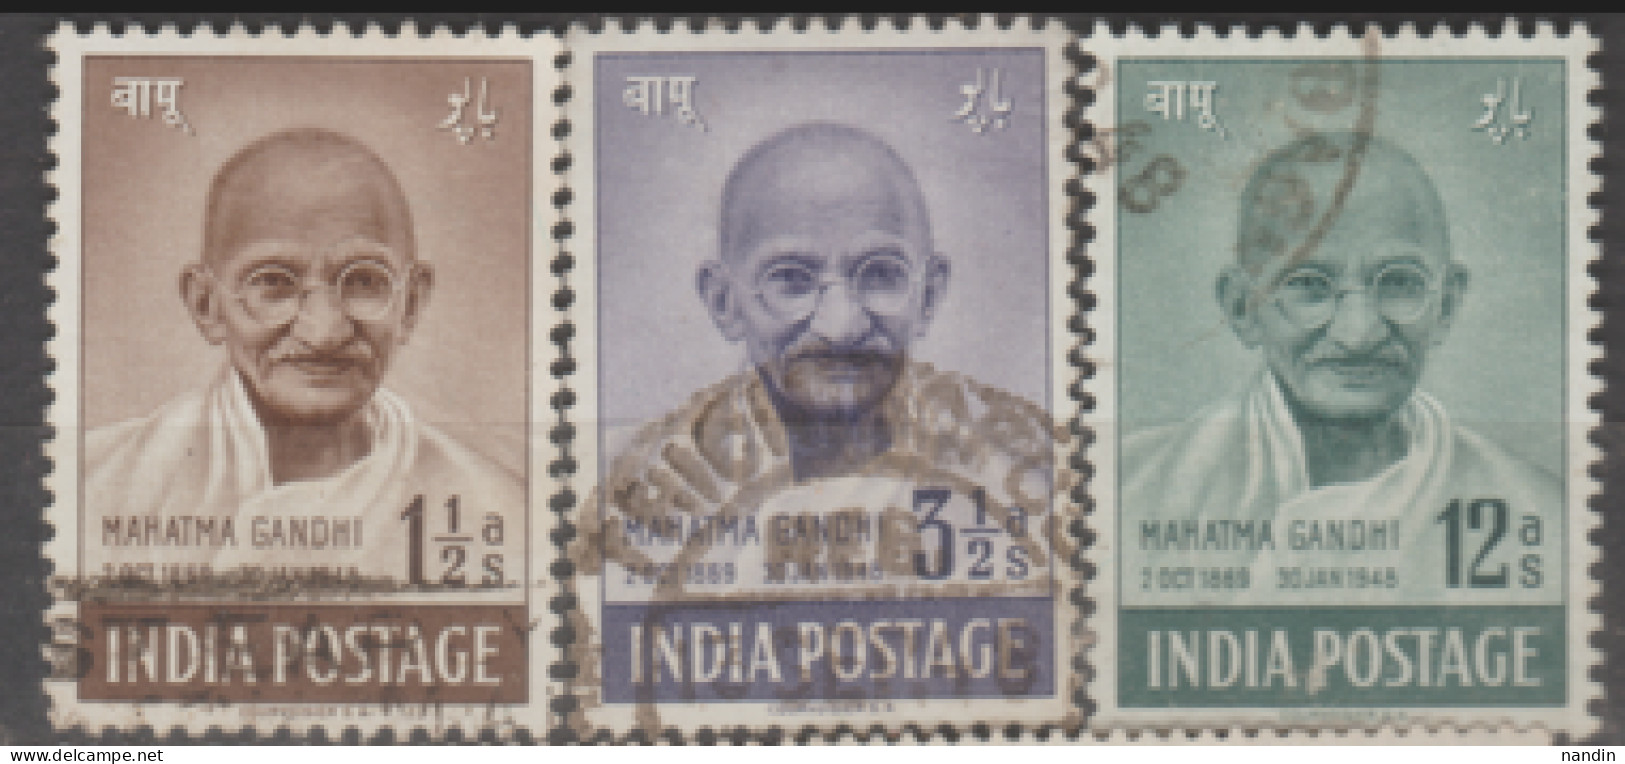 USED STAMP FROM 1948 INDIA ON GANDHI ON 1ST ANNEVERSARY OF INDEPENDENT(15TH AUG 1948) - Gebraucht